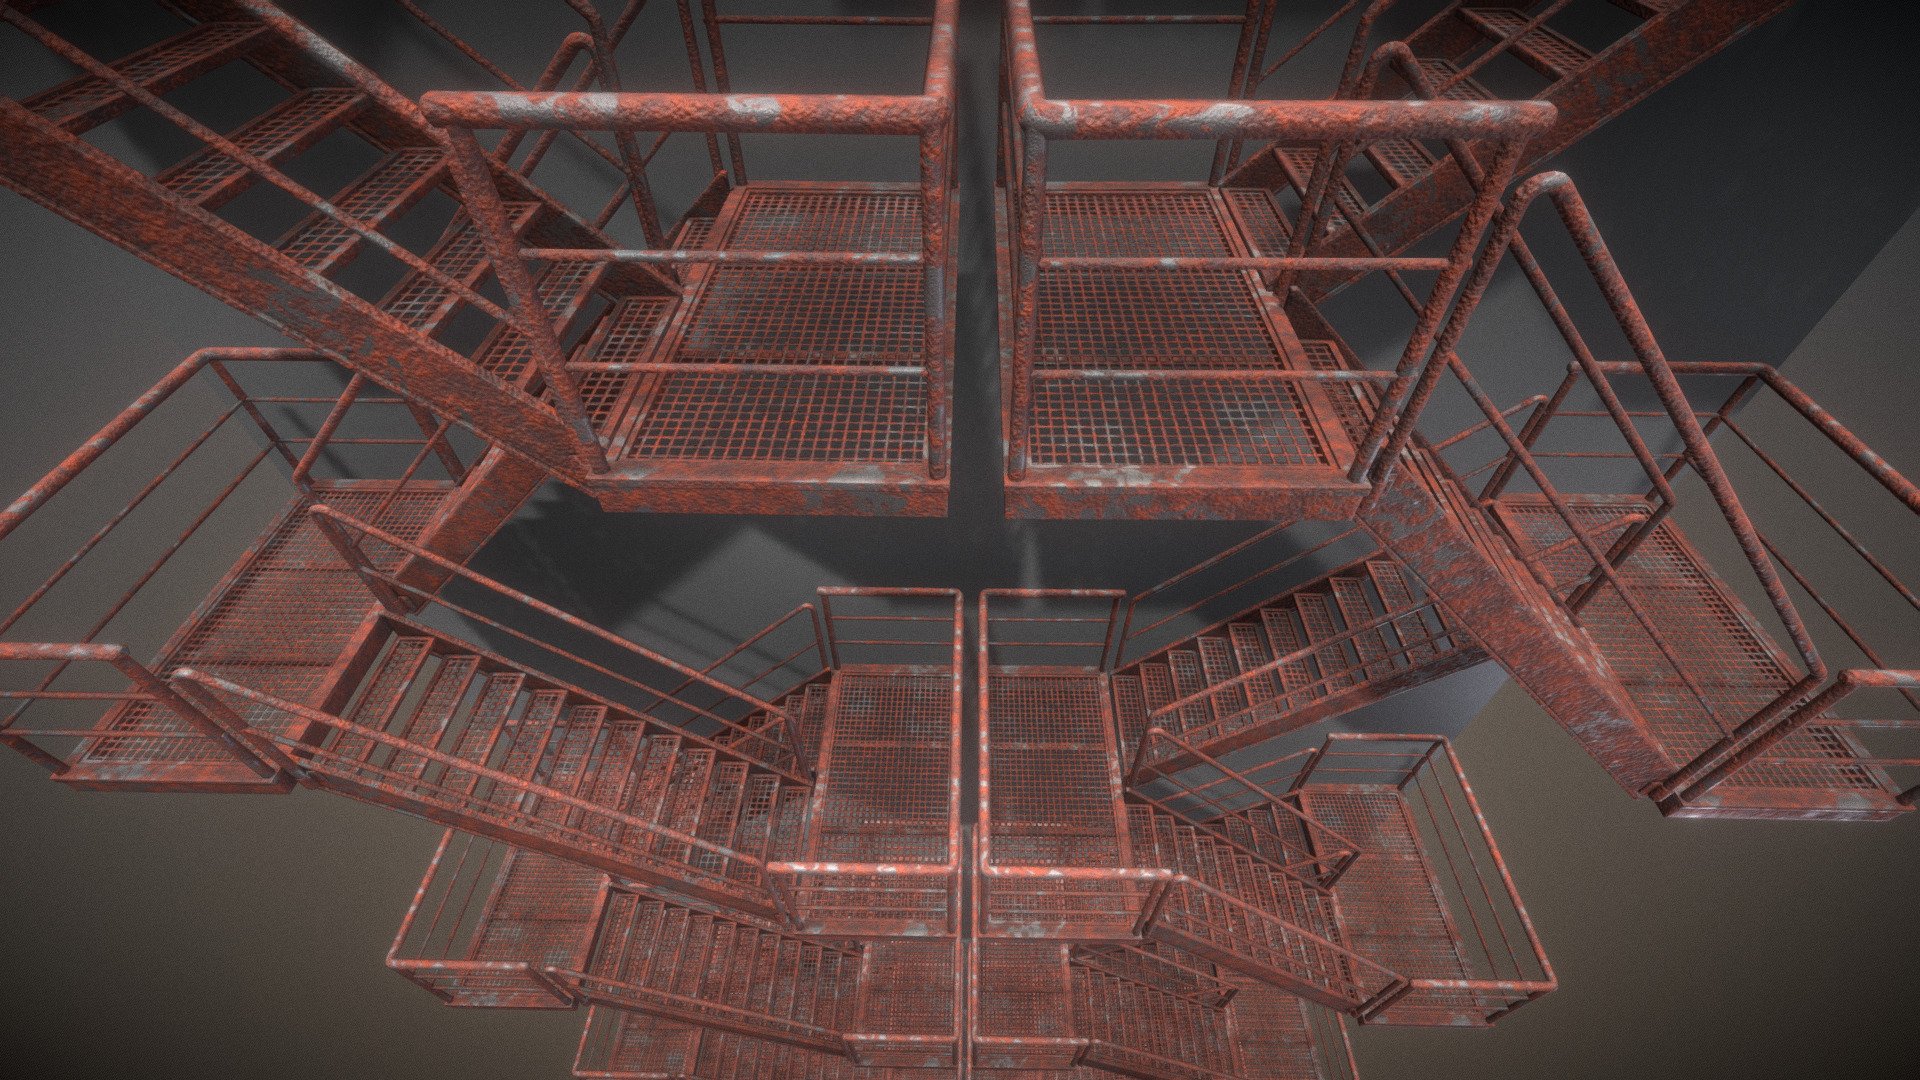 Here is the rusted version of the industrial staircase with a break test animation.
PBR-Textures in 8192 x 8192 px resolution (png and jpg). 
You should scale it down to 2k or 4k if use it in games! 
Modeled and textured in Blender 2.8



Here are some other versions of this staircase:




Modular Industrial Staircase Rusty (High-Poly)

Modular Industrial Staircase Basic Version (High-Poly)

Industrial Staircase High-Poly (Galvanized)

Industrial Staircase Low-Poly (Galvanized)
 - Modular Industrial Staircase Rusted (Low-Poly) - Buy Royalty Free 3D model by VIS-All-3D (@VIS-All) 3d model